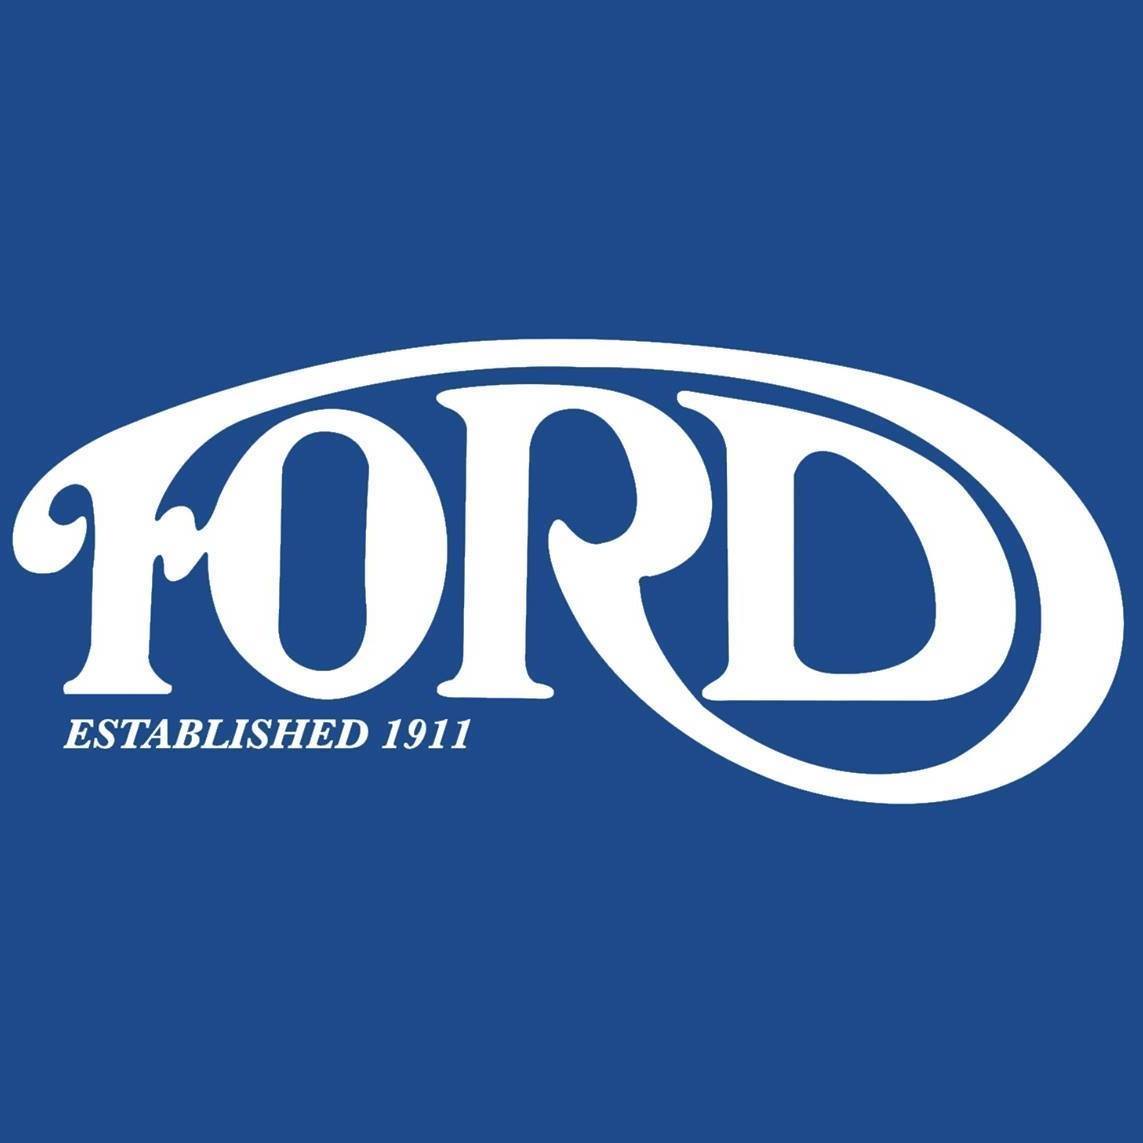 Ford Hotel Supply